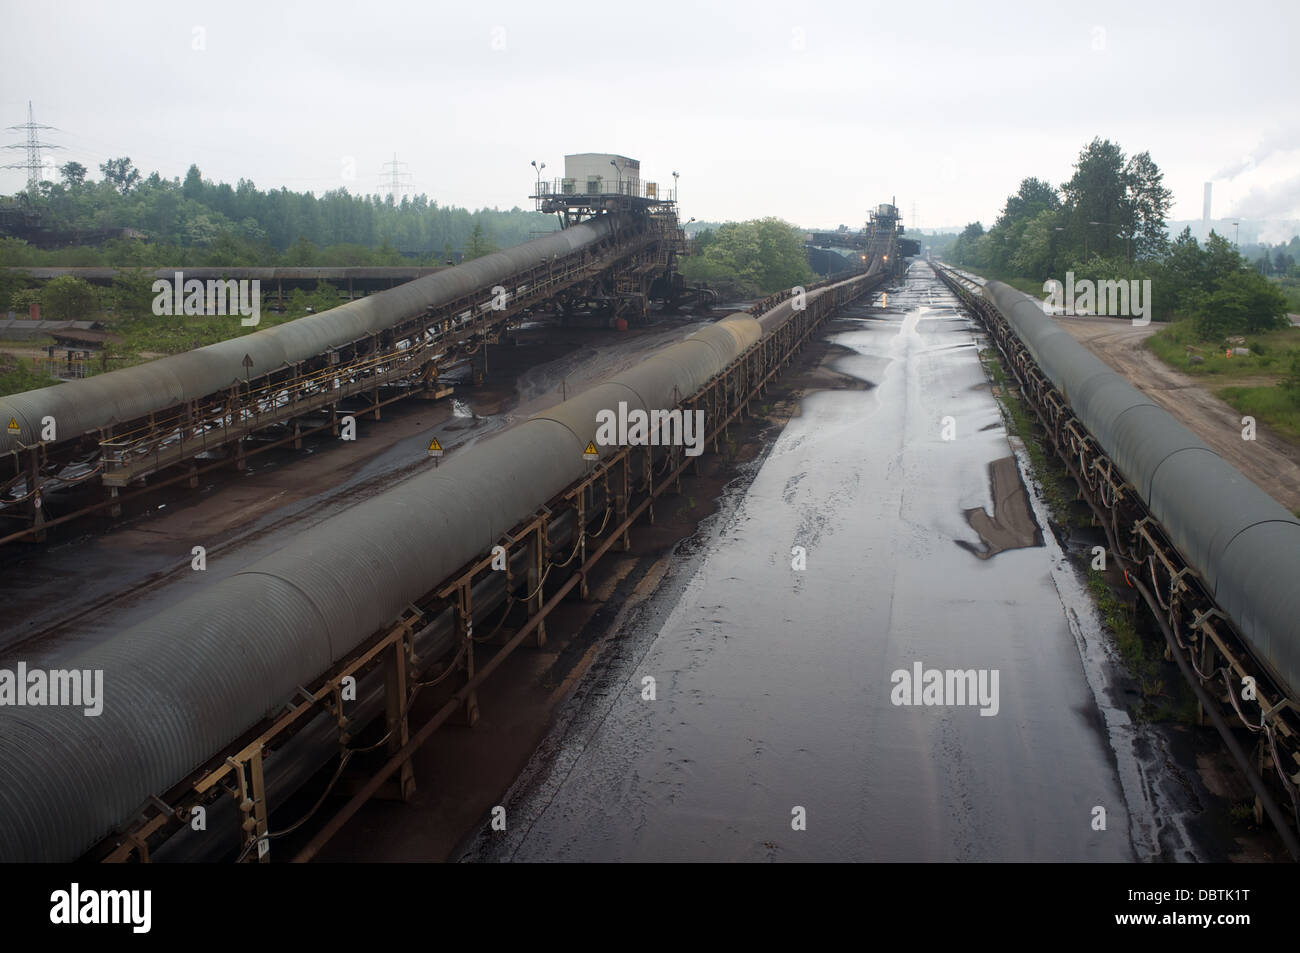 Conveyer belts transporting ignite (brown coal) from a surface mine to a power station Stock Photo